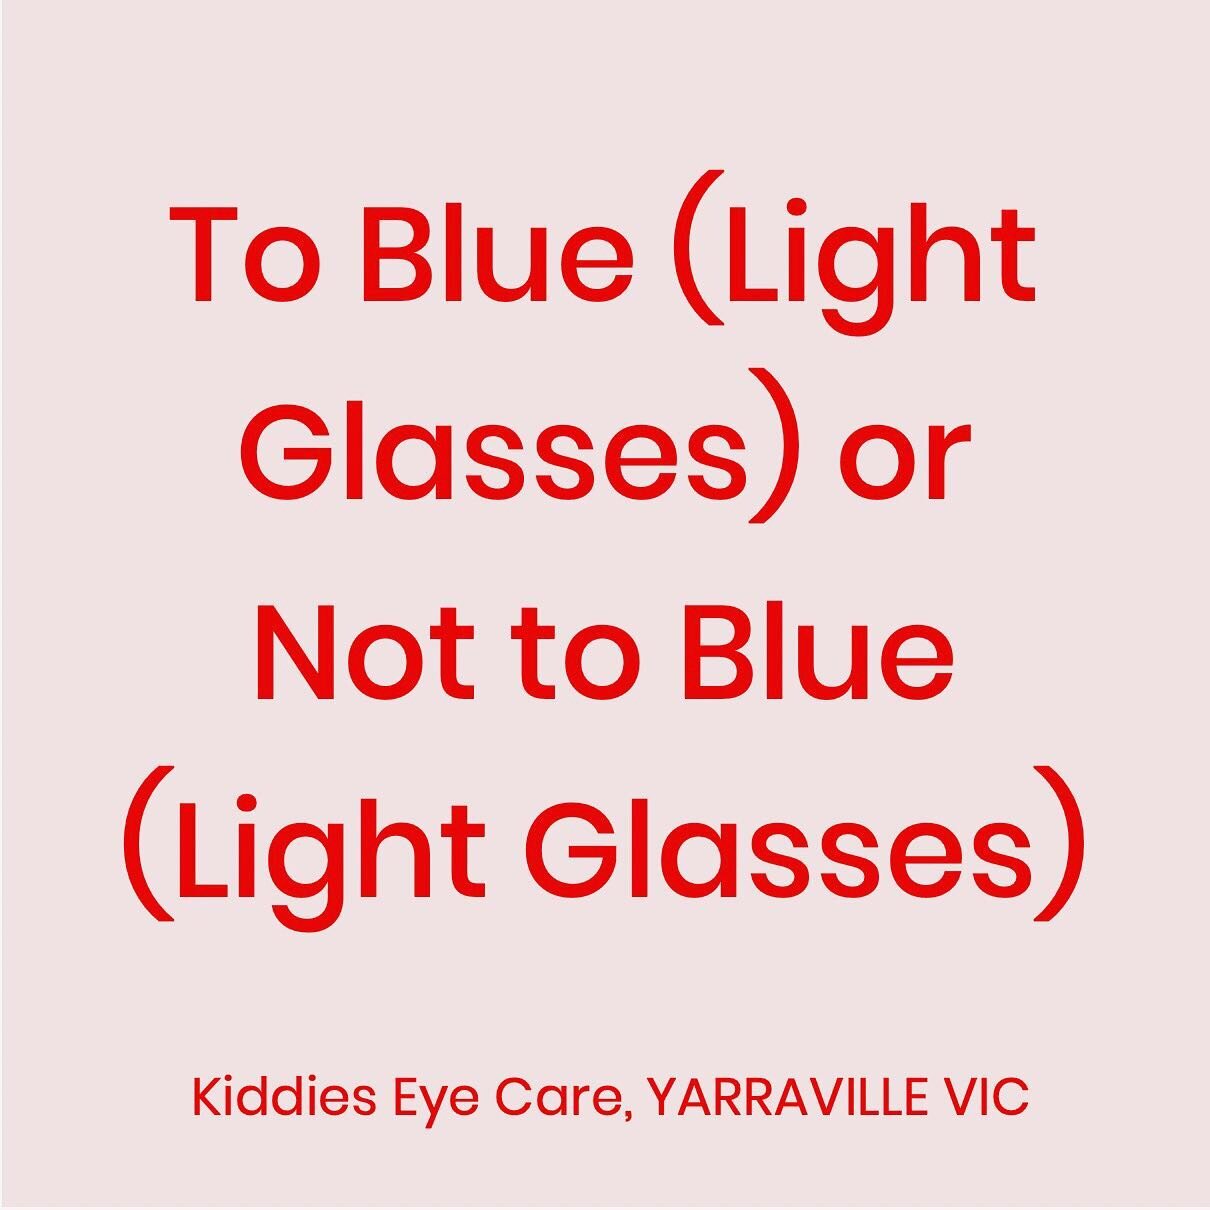 To blue (light glasses) or not to blue (light glasses). Be sure to tag a friend who needs to read this and let us know your thoughts on the recent blue light filter trend! Thank you to @kiddieseyecare for sharing their most recent blog on Blue light 